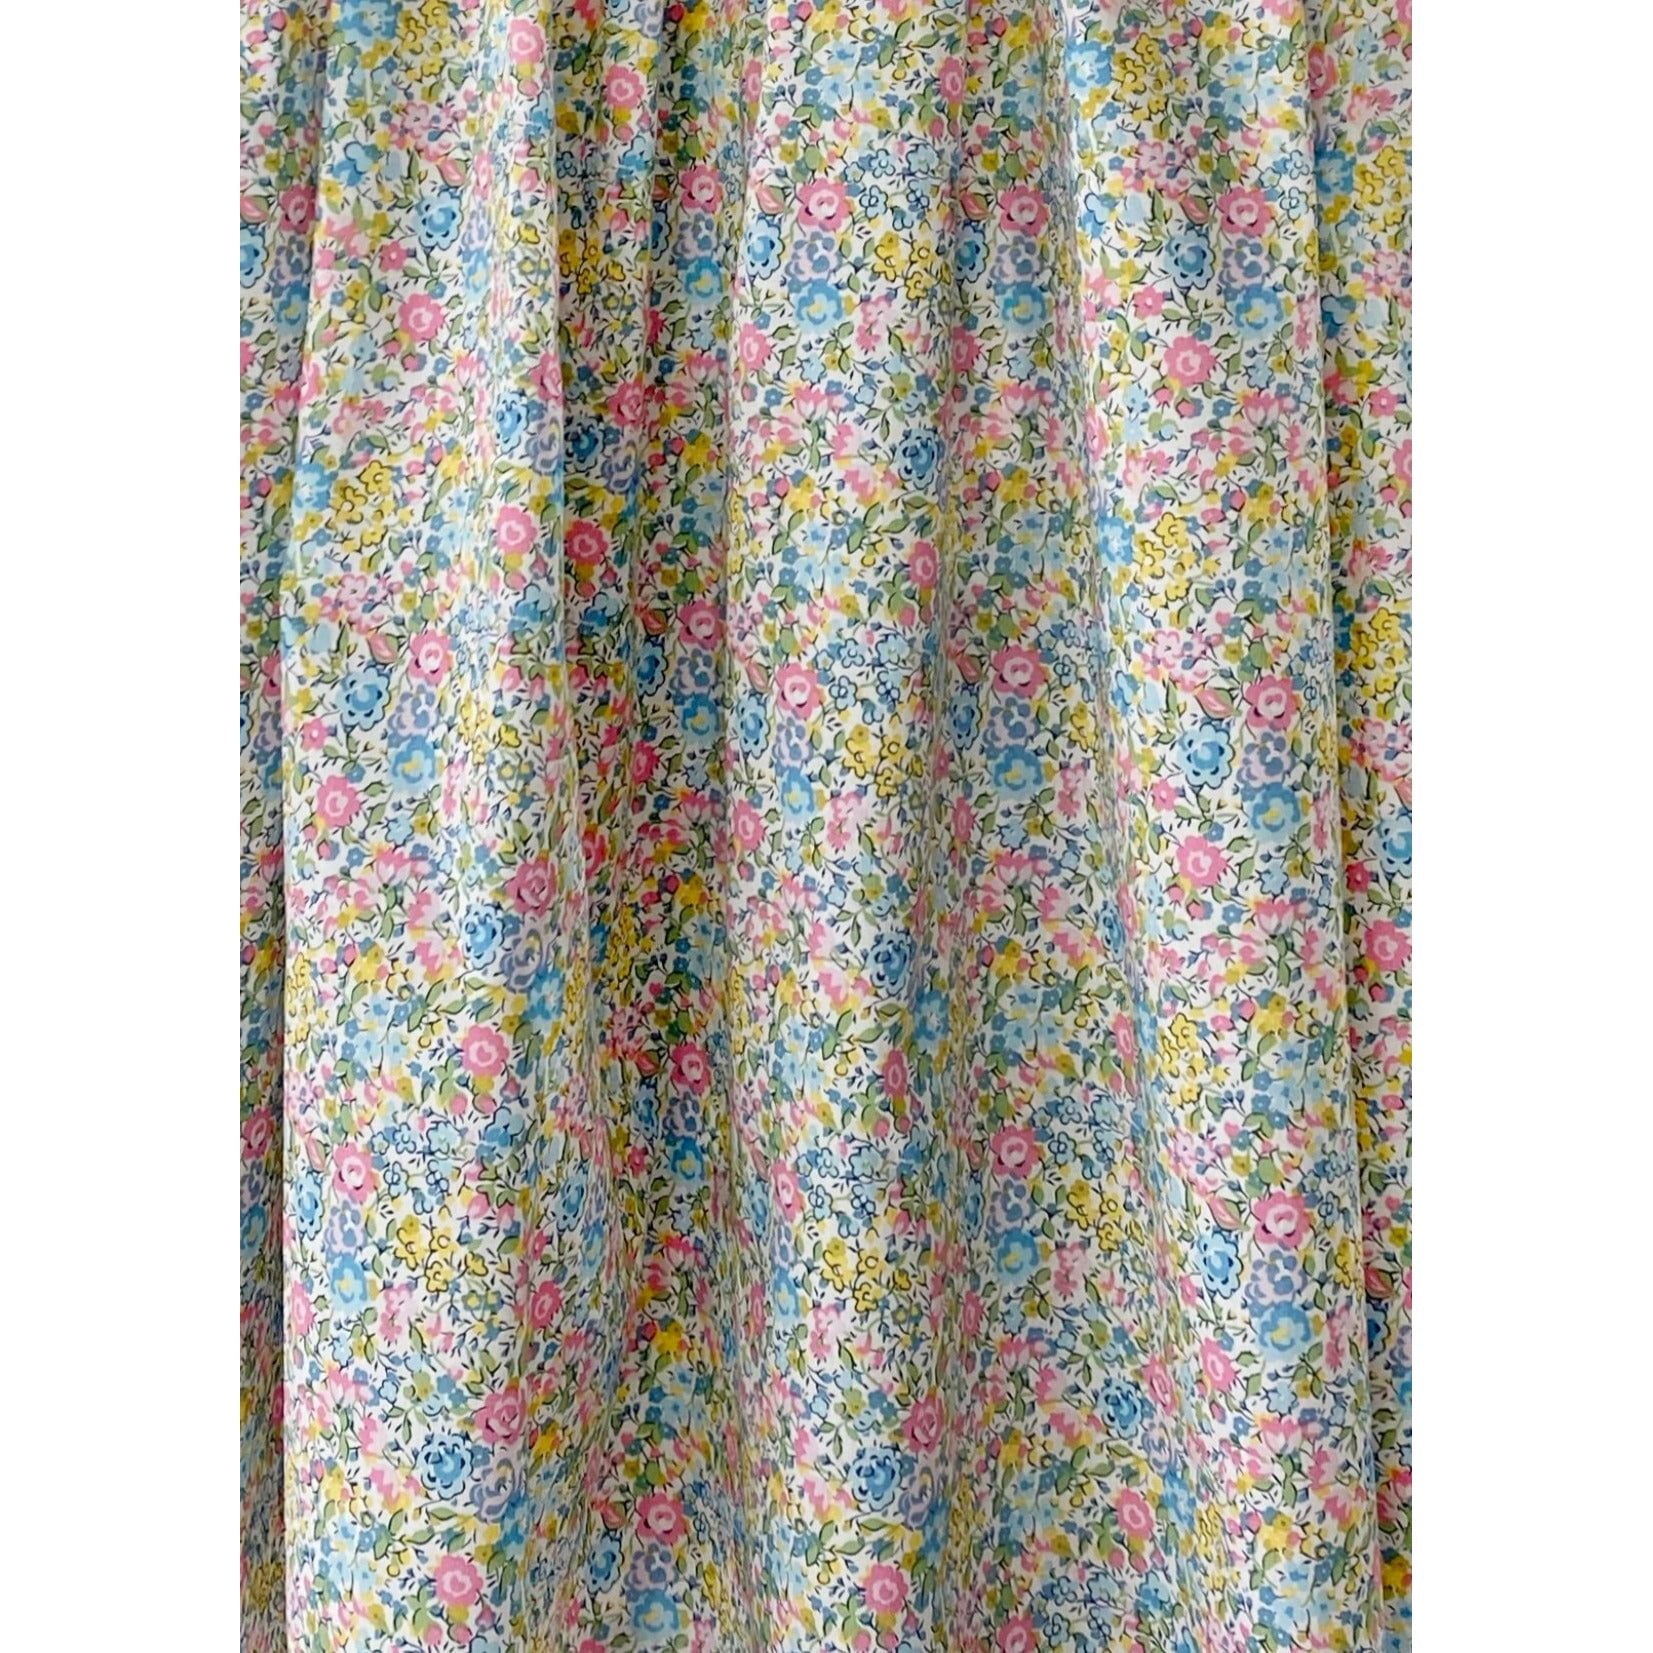 Girls' Jaime Dress in Pastel Ditsy Floral by Casey Marks